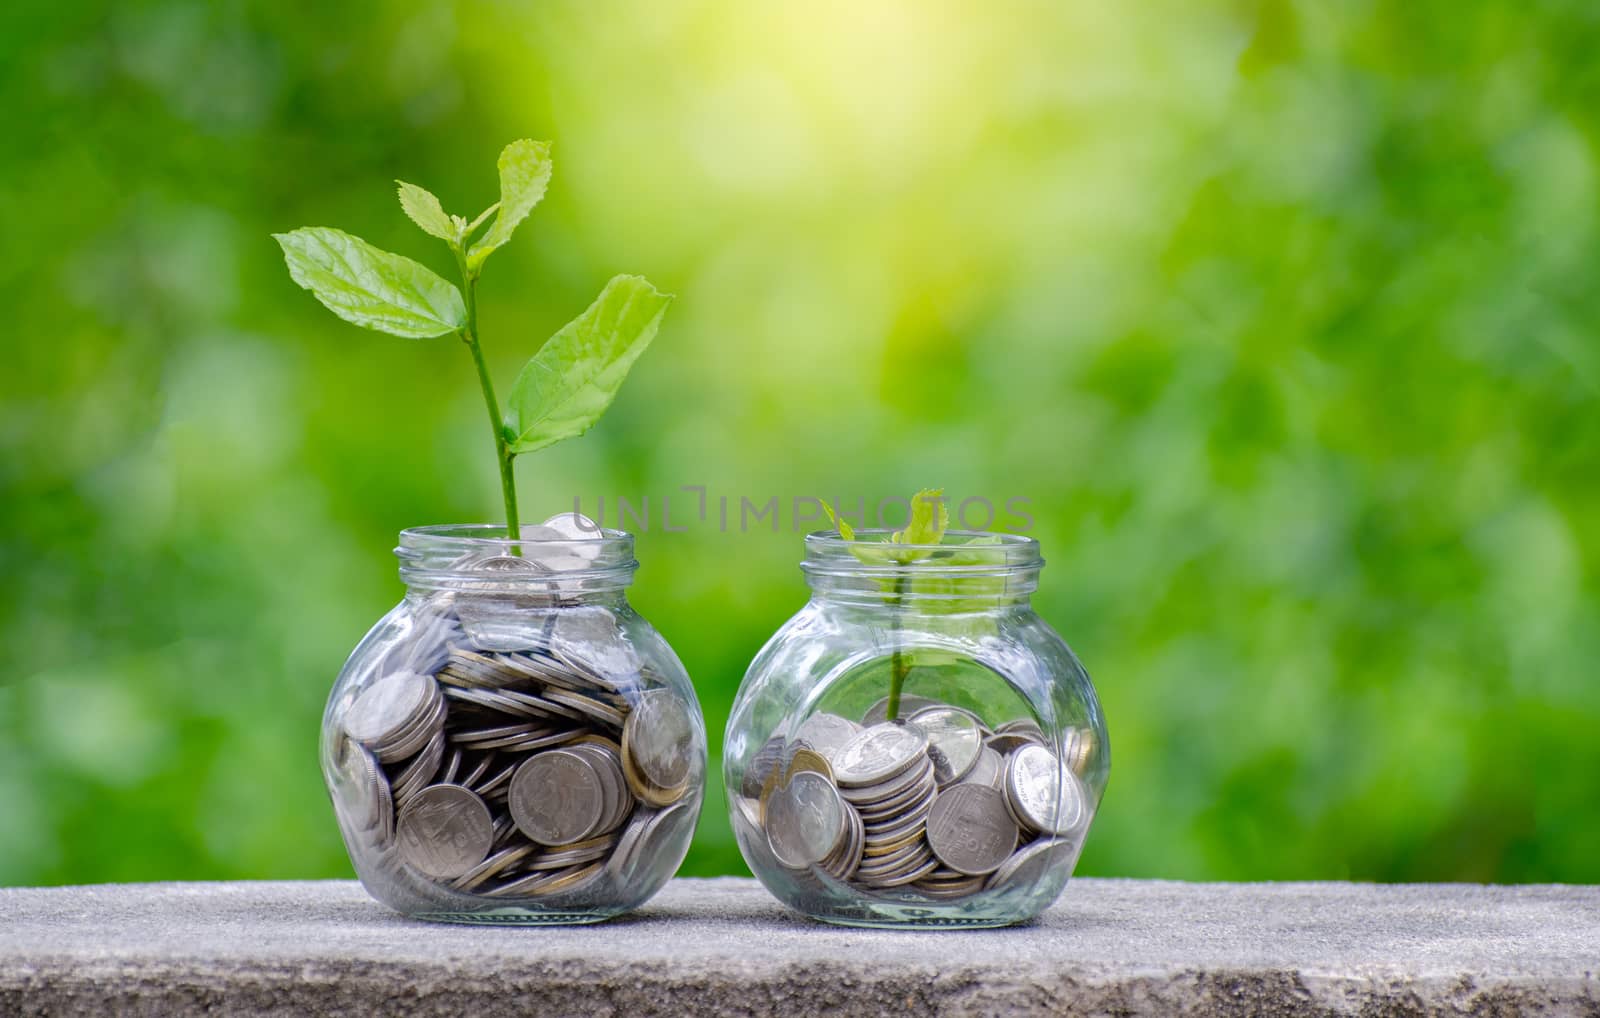 Coin tree Glass Jar Plant growing from coins outside the glass jar on blurred green natural background money saving and investment financial concept